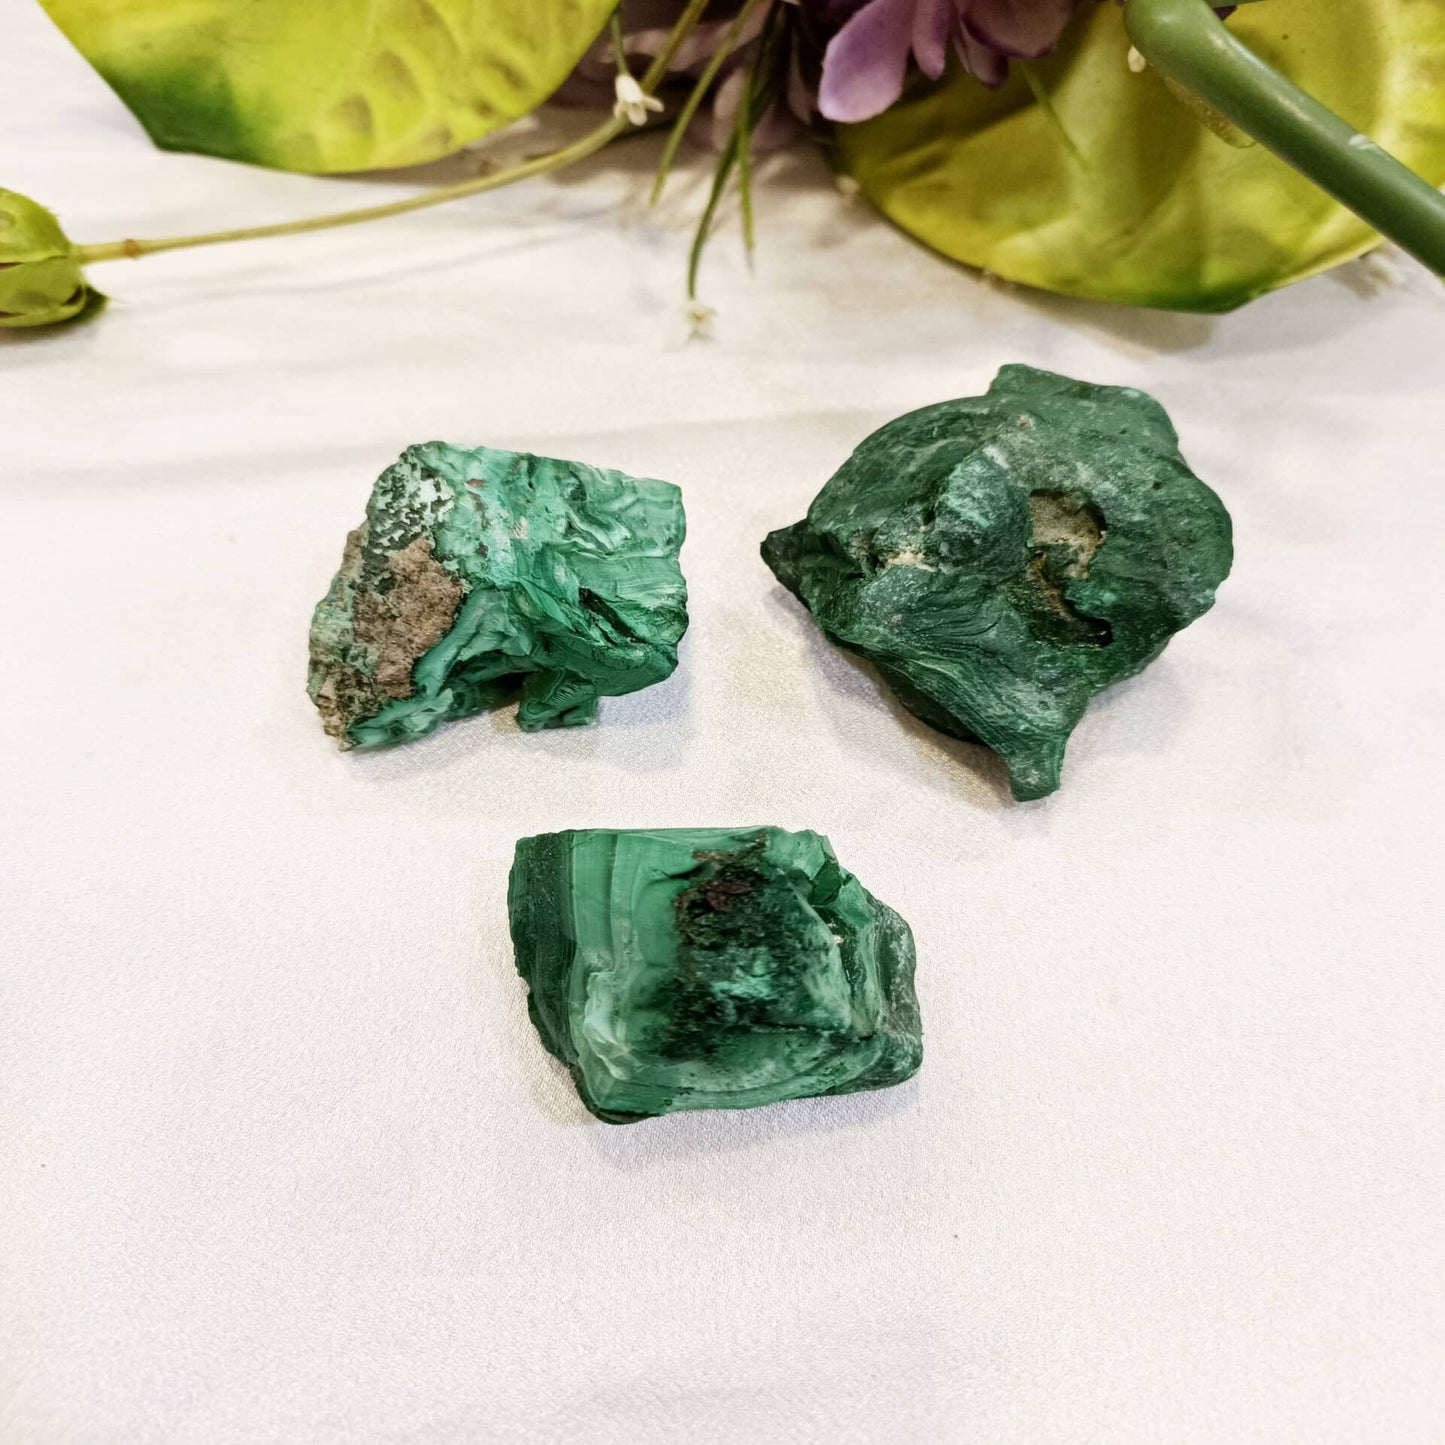 Captivating Beauty Unearthed: Malachite Raw Stones - Nature's Masterpiece